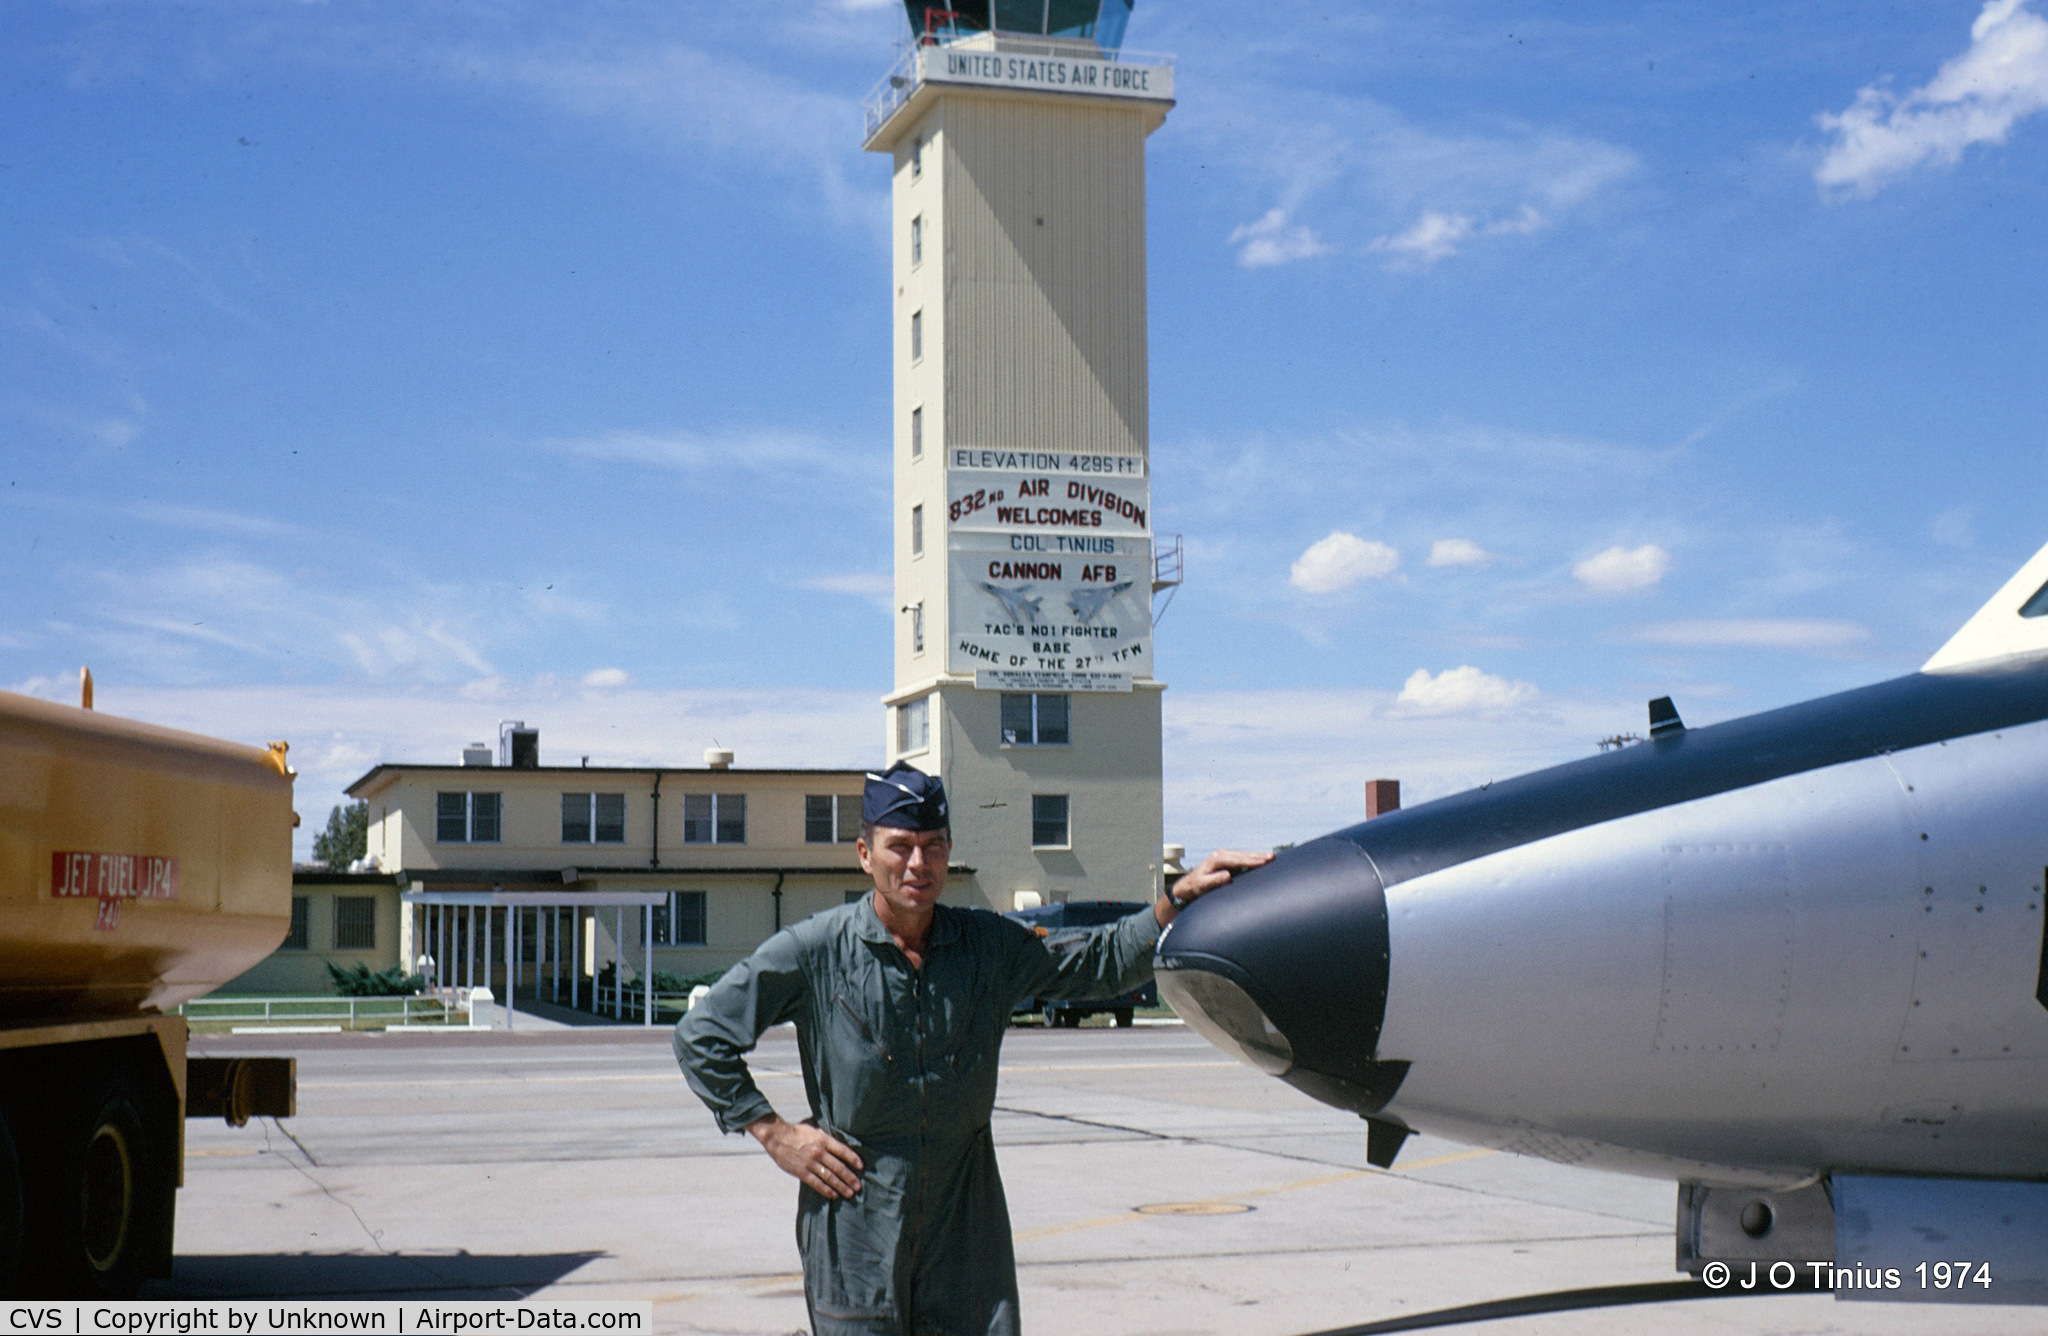 Cannon Afb Airport (CVS) - Col John O Tinius, USAF, welcomed to Cannon AFB, NM. Probably 1974.
Col Tinius flew the F-86 on 41 combat missions in Korea and remained on flight status for almost his entire career, retiring in 1976.
